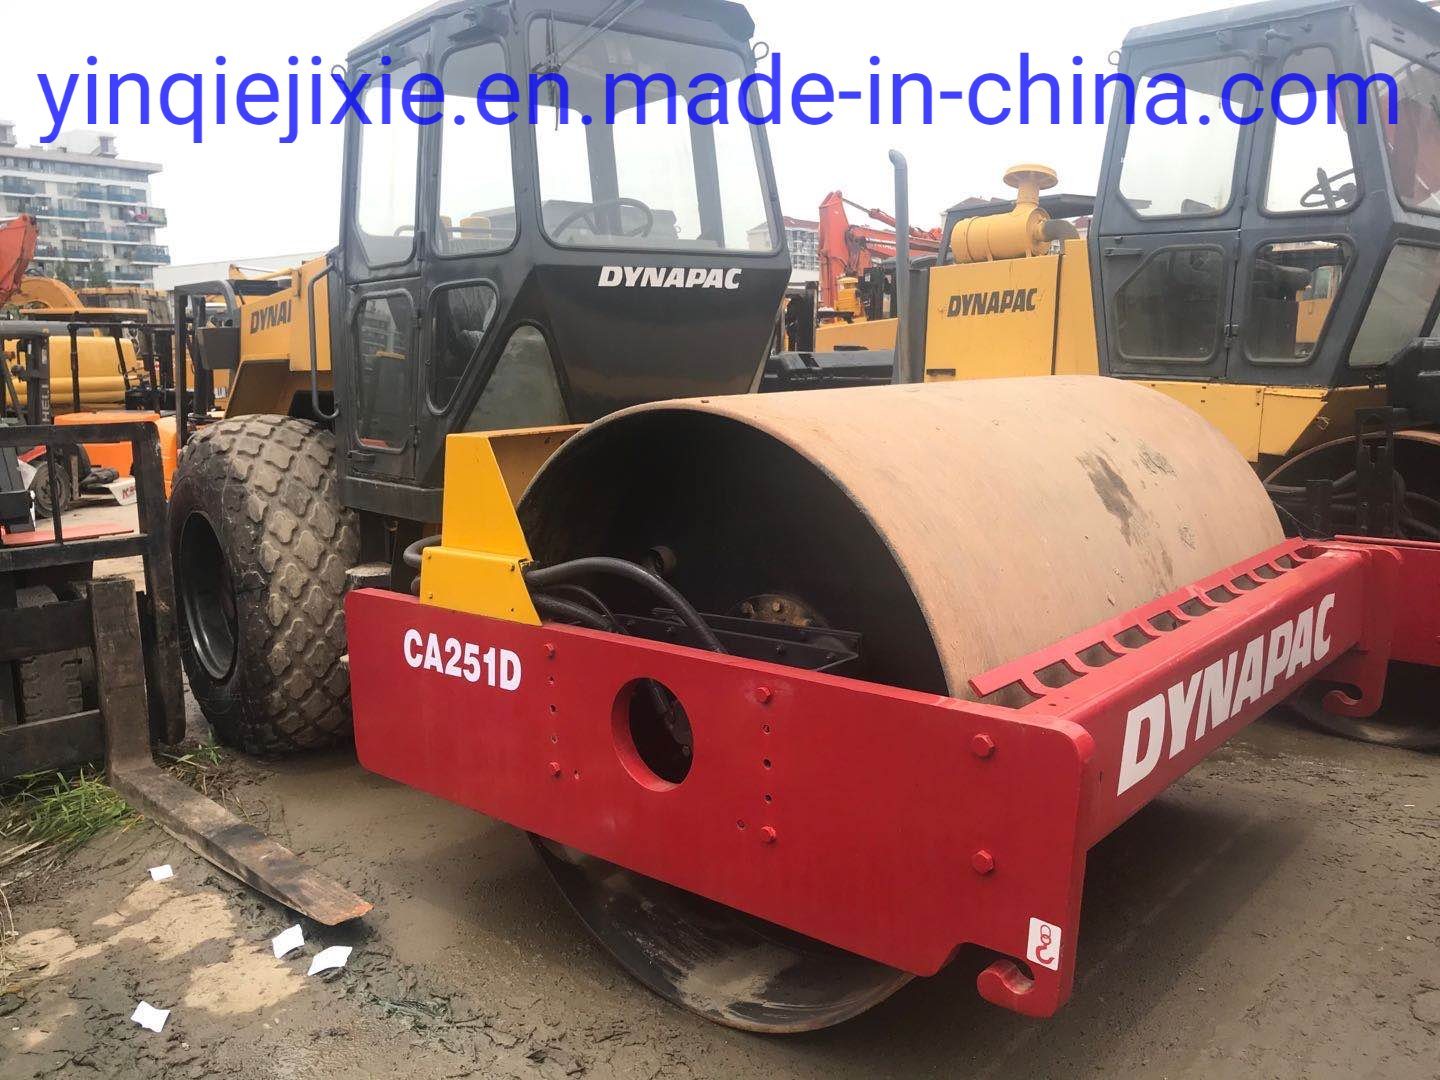 Used Dynapac Ca251 Compactor for Sale, Secondhand Vibration Road Roller